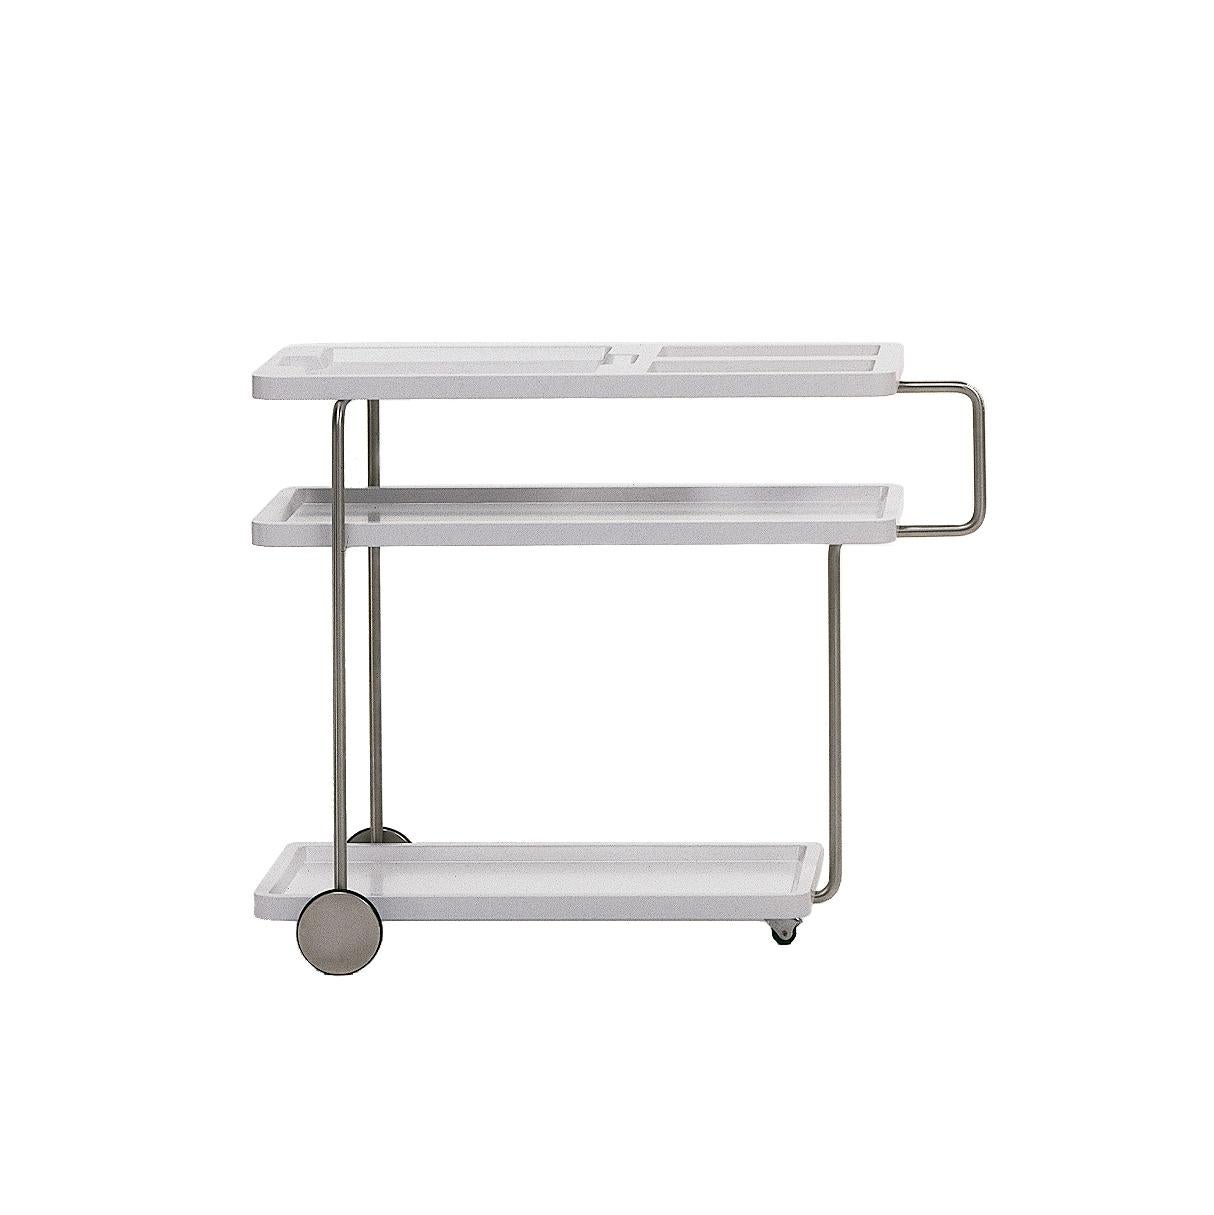 Happy hour trolley by Alfredo Häberli

Black or withe trolley. Chromed iron structure. Heat-shaped ABS+PMMA plastic trays, available painted with polyurethane micro-textured in matte white RAL 9003 or black RAL 9005.

Optional: Service table /